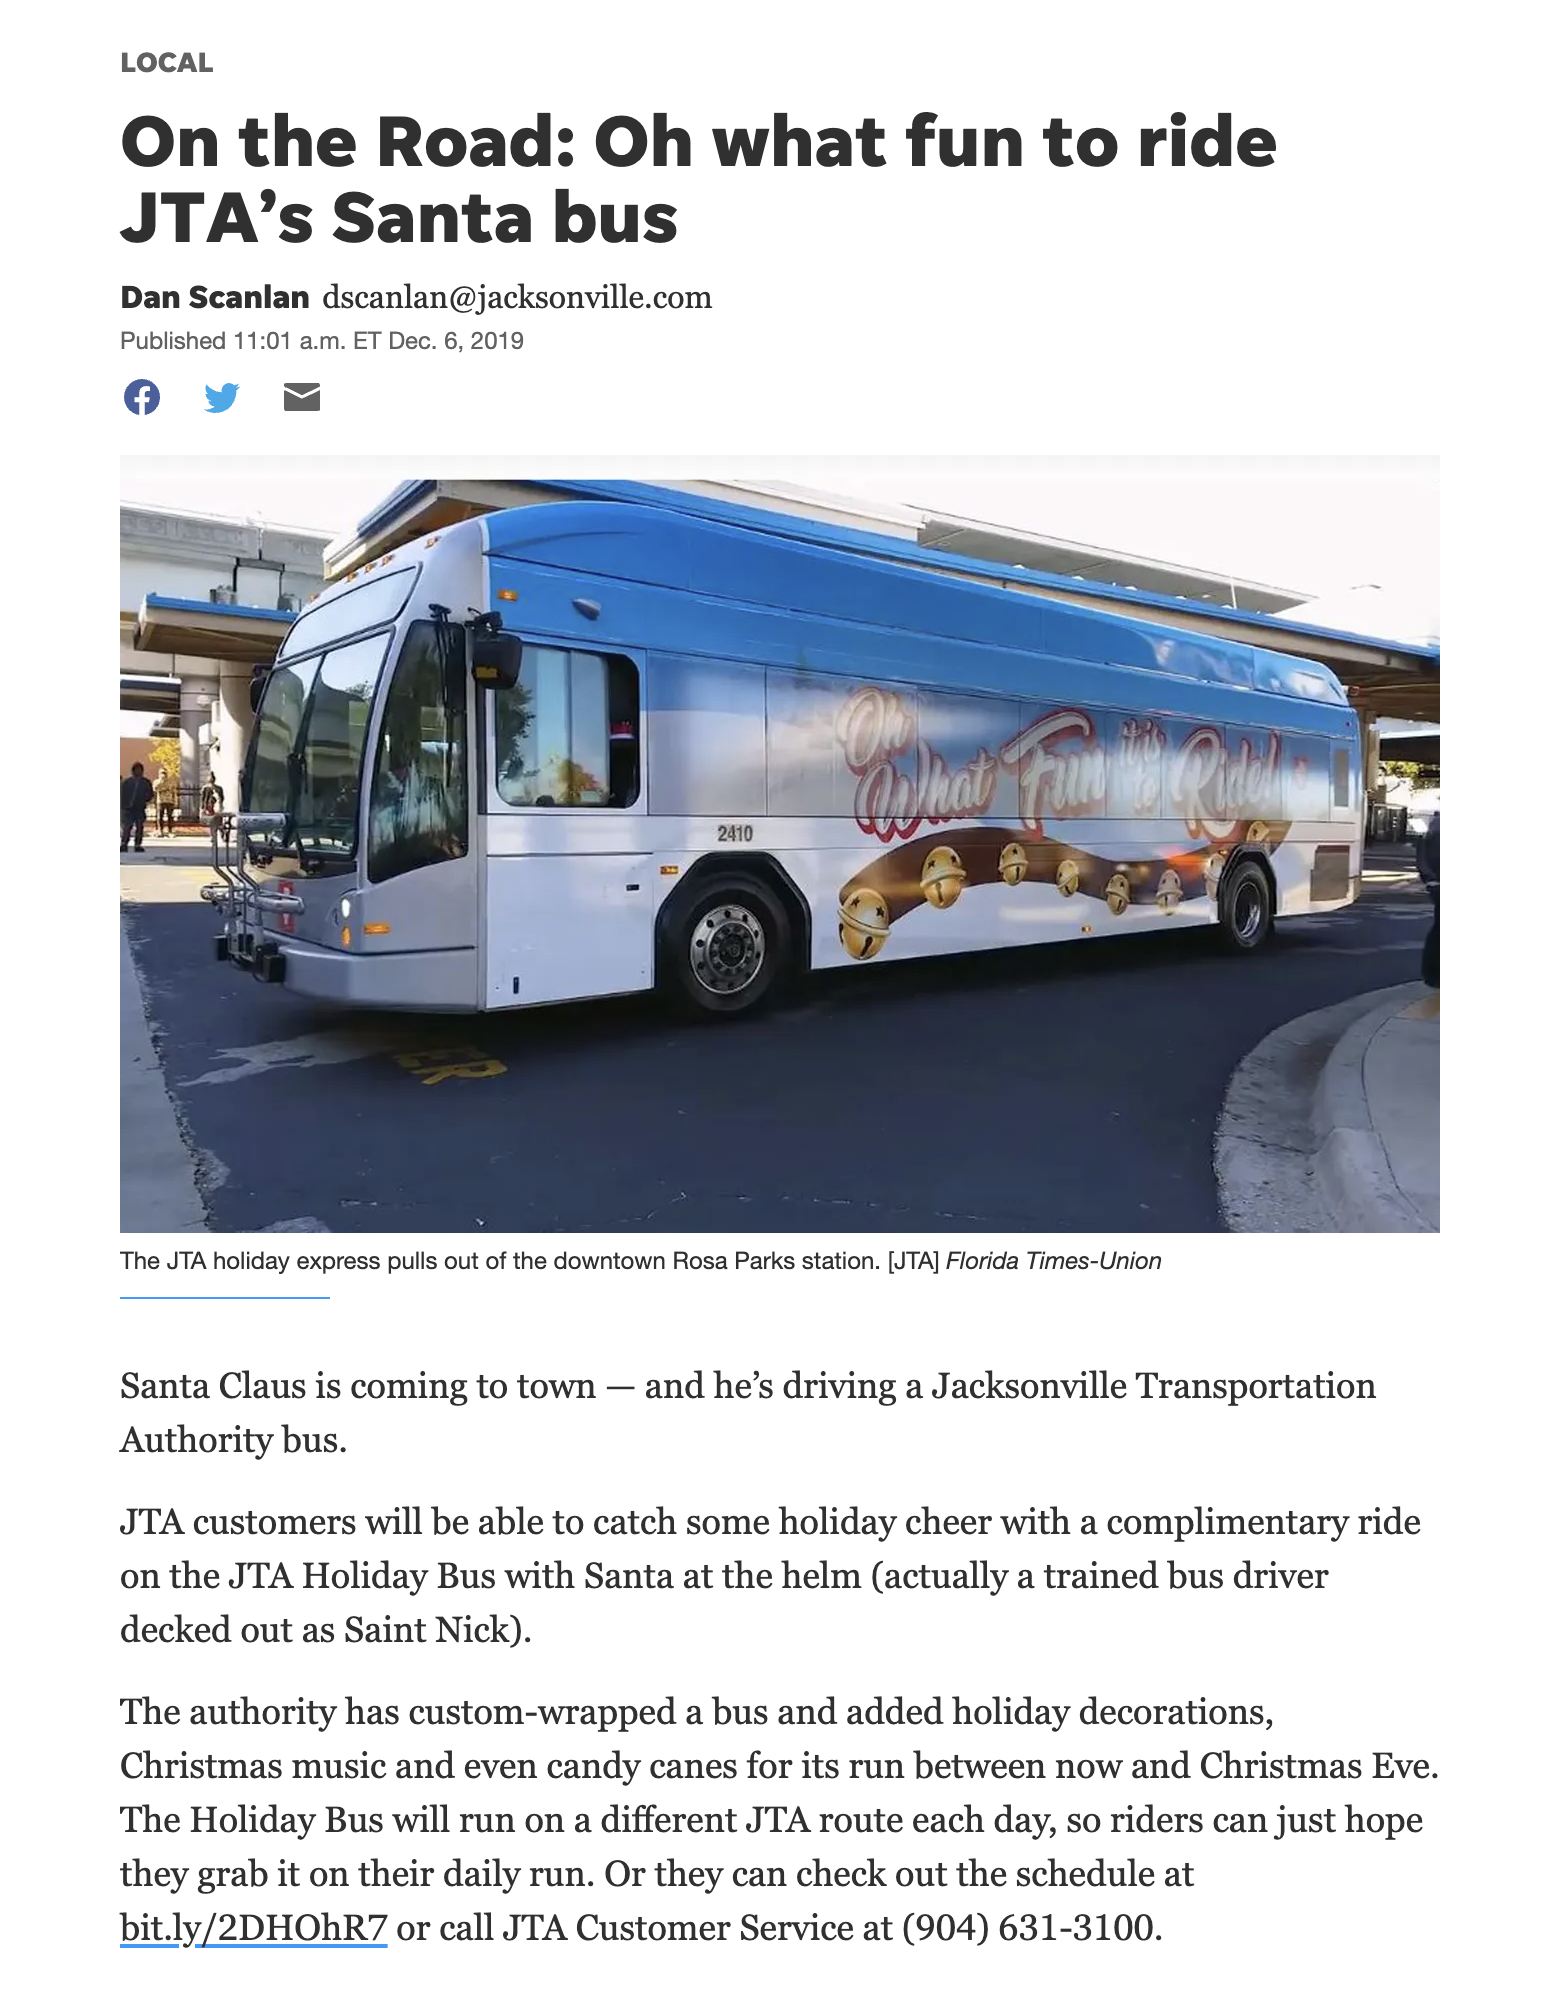 A thumbnail image of an article on jacksonville.com about the Jacksonville Transportation Authority's 2019 holiday bus featuring the driver dressed as Santa.